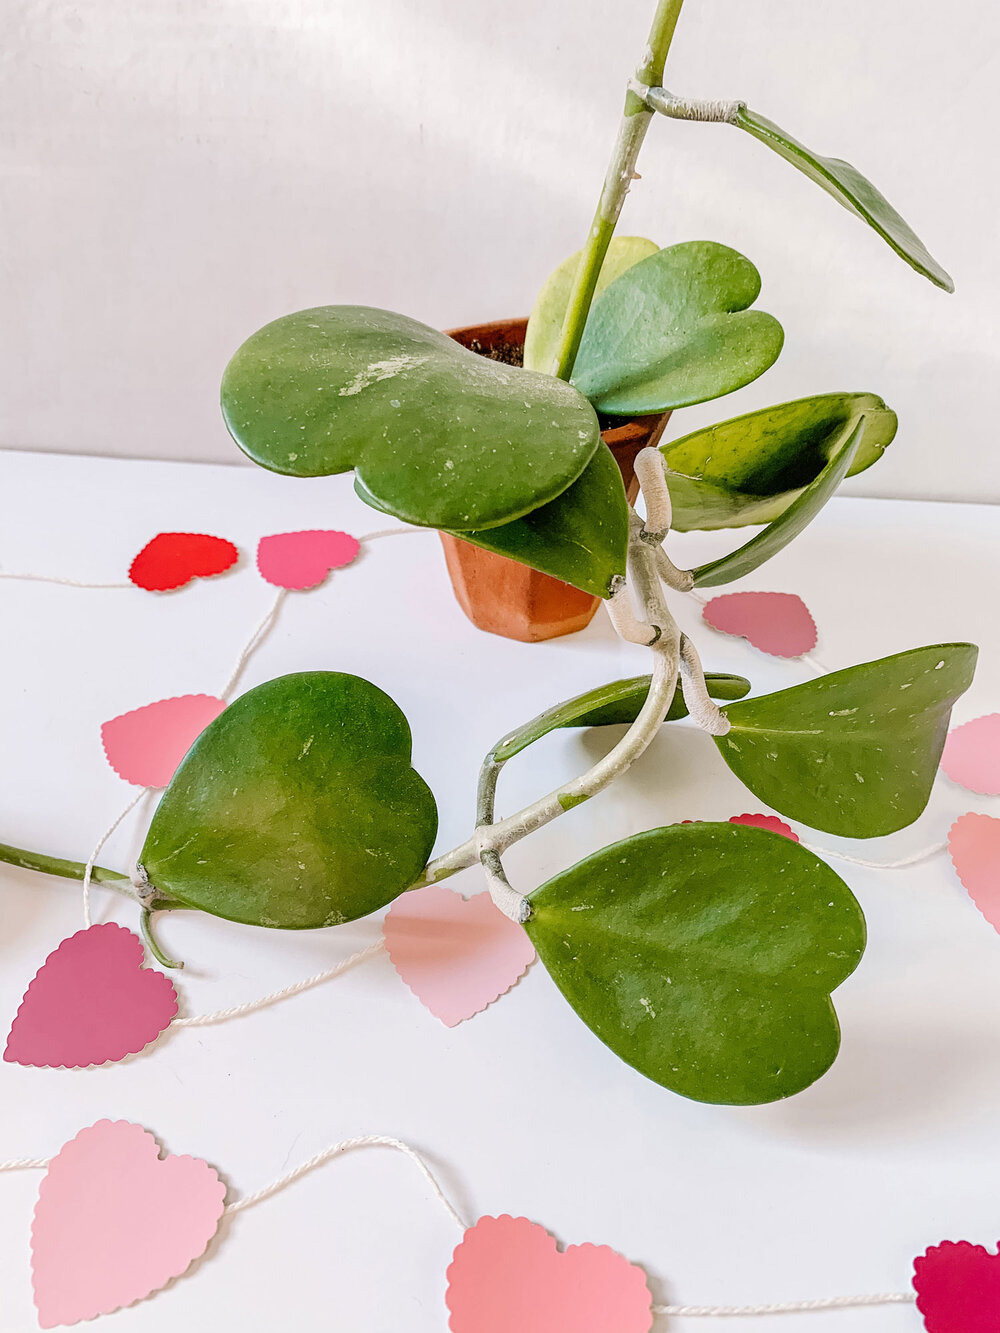 to 'Valentine' Hoya — The Green Mad House